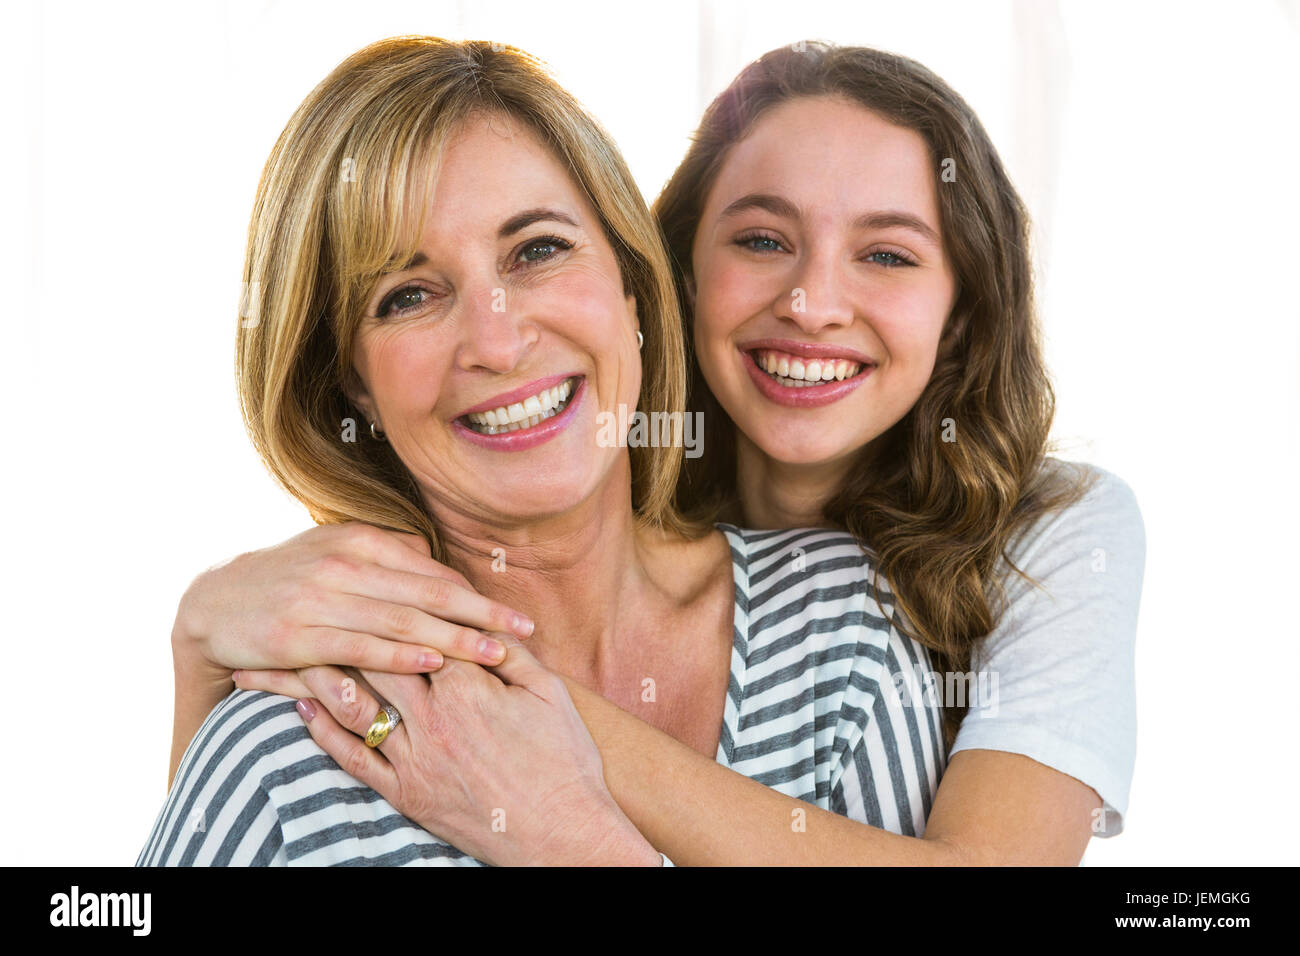 Pretty mother and daughter Stock Photo - Alamy